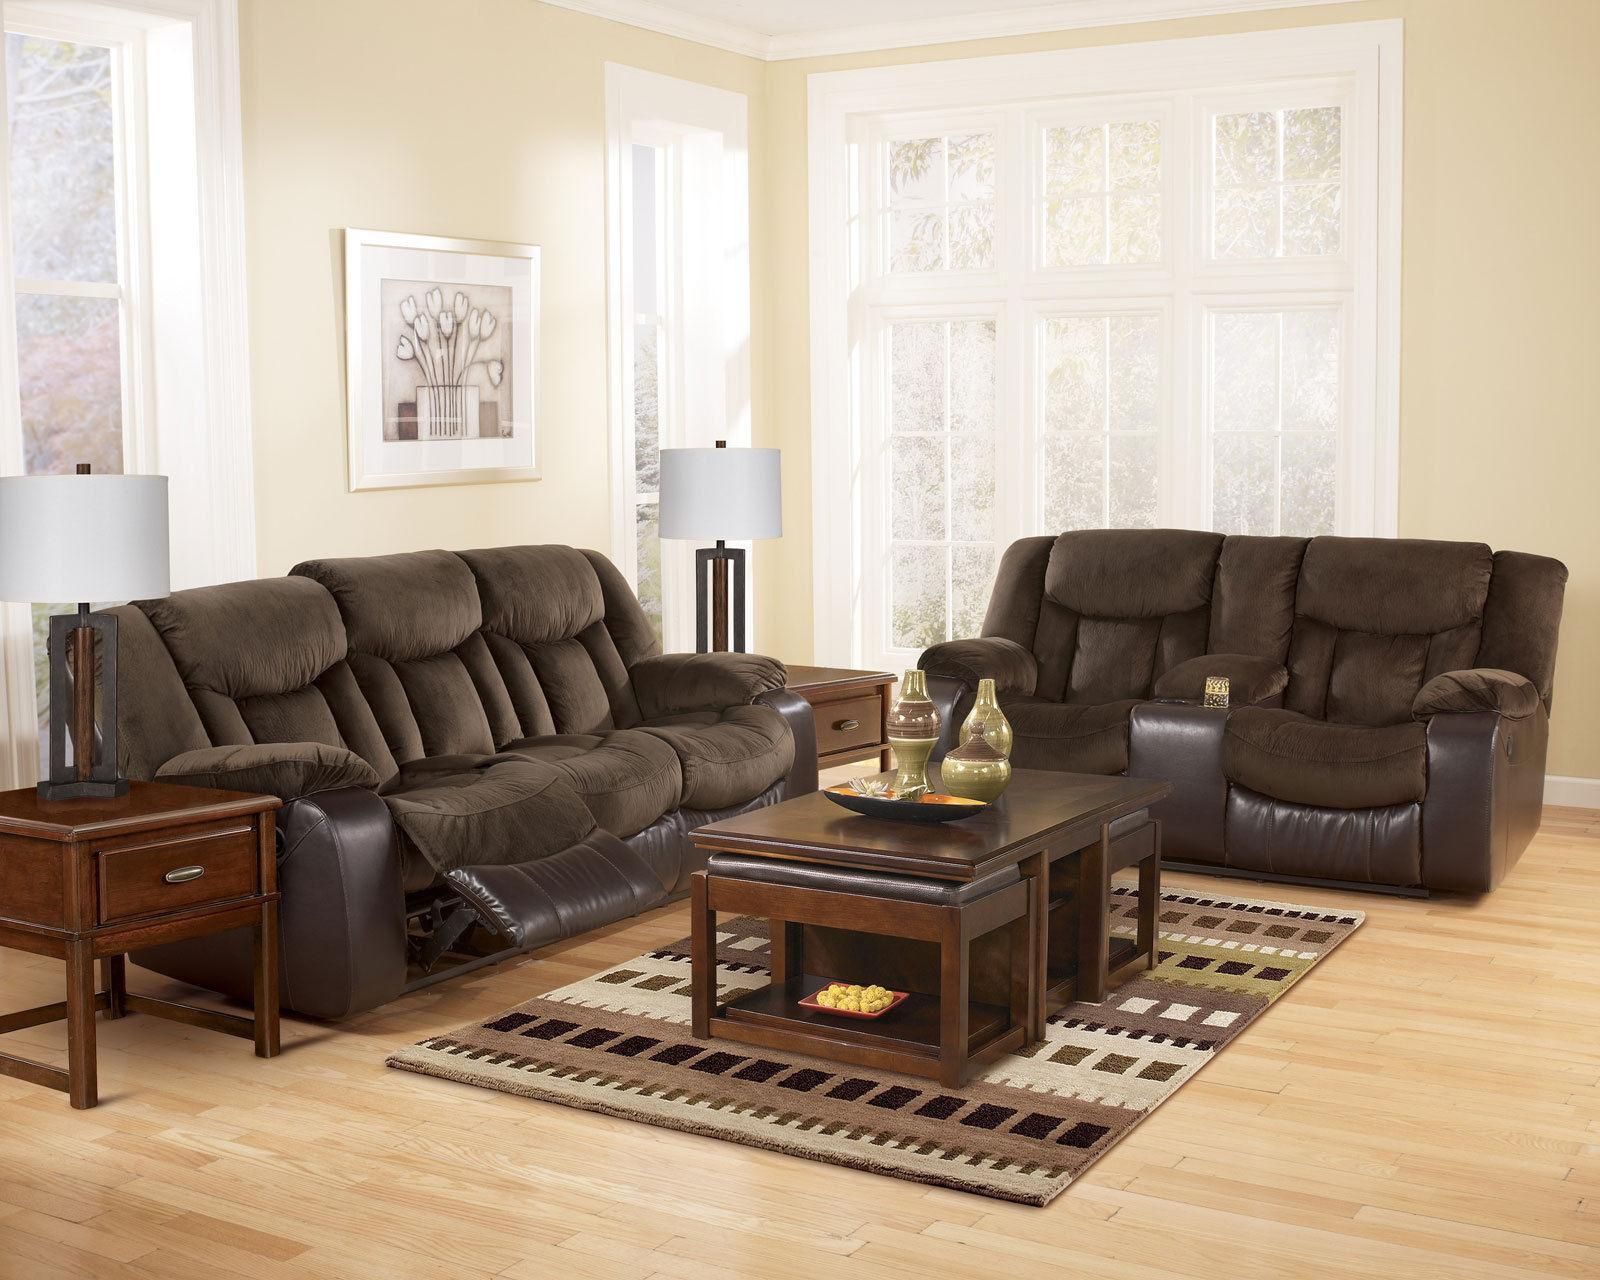 Allegro Living Room Brown Microfiber & Faux Leather Reclining Sofa In Faux Leather Sofas In Chocolate Brown (Gallery 18 of 20)